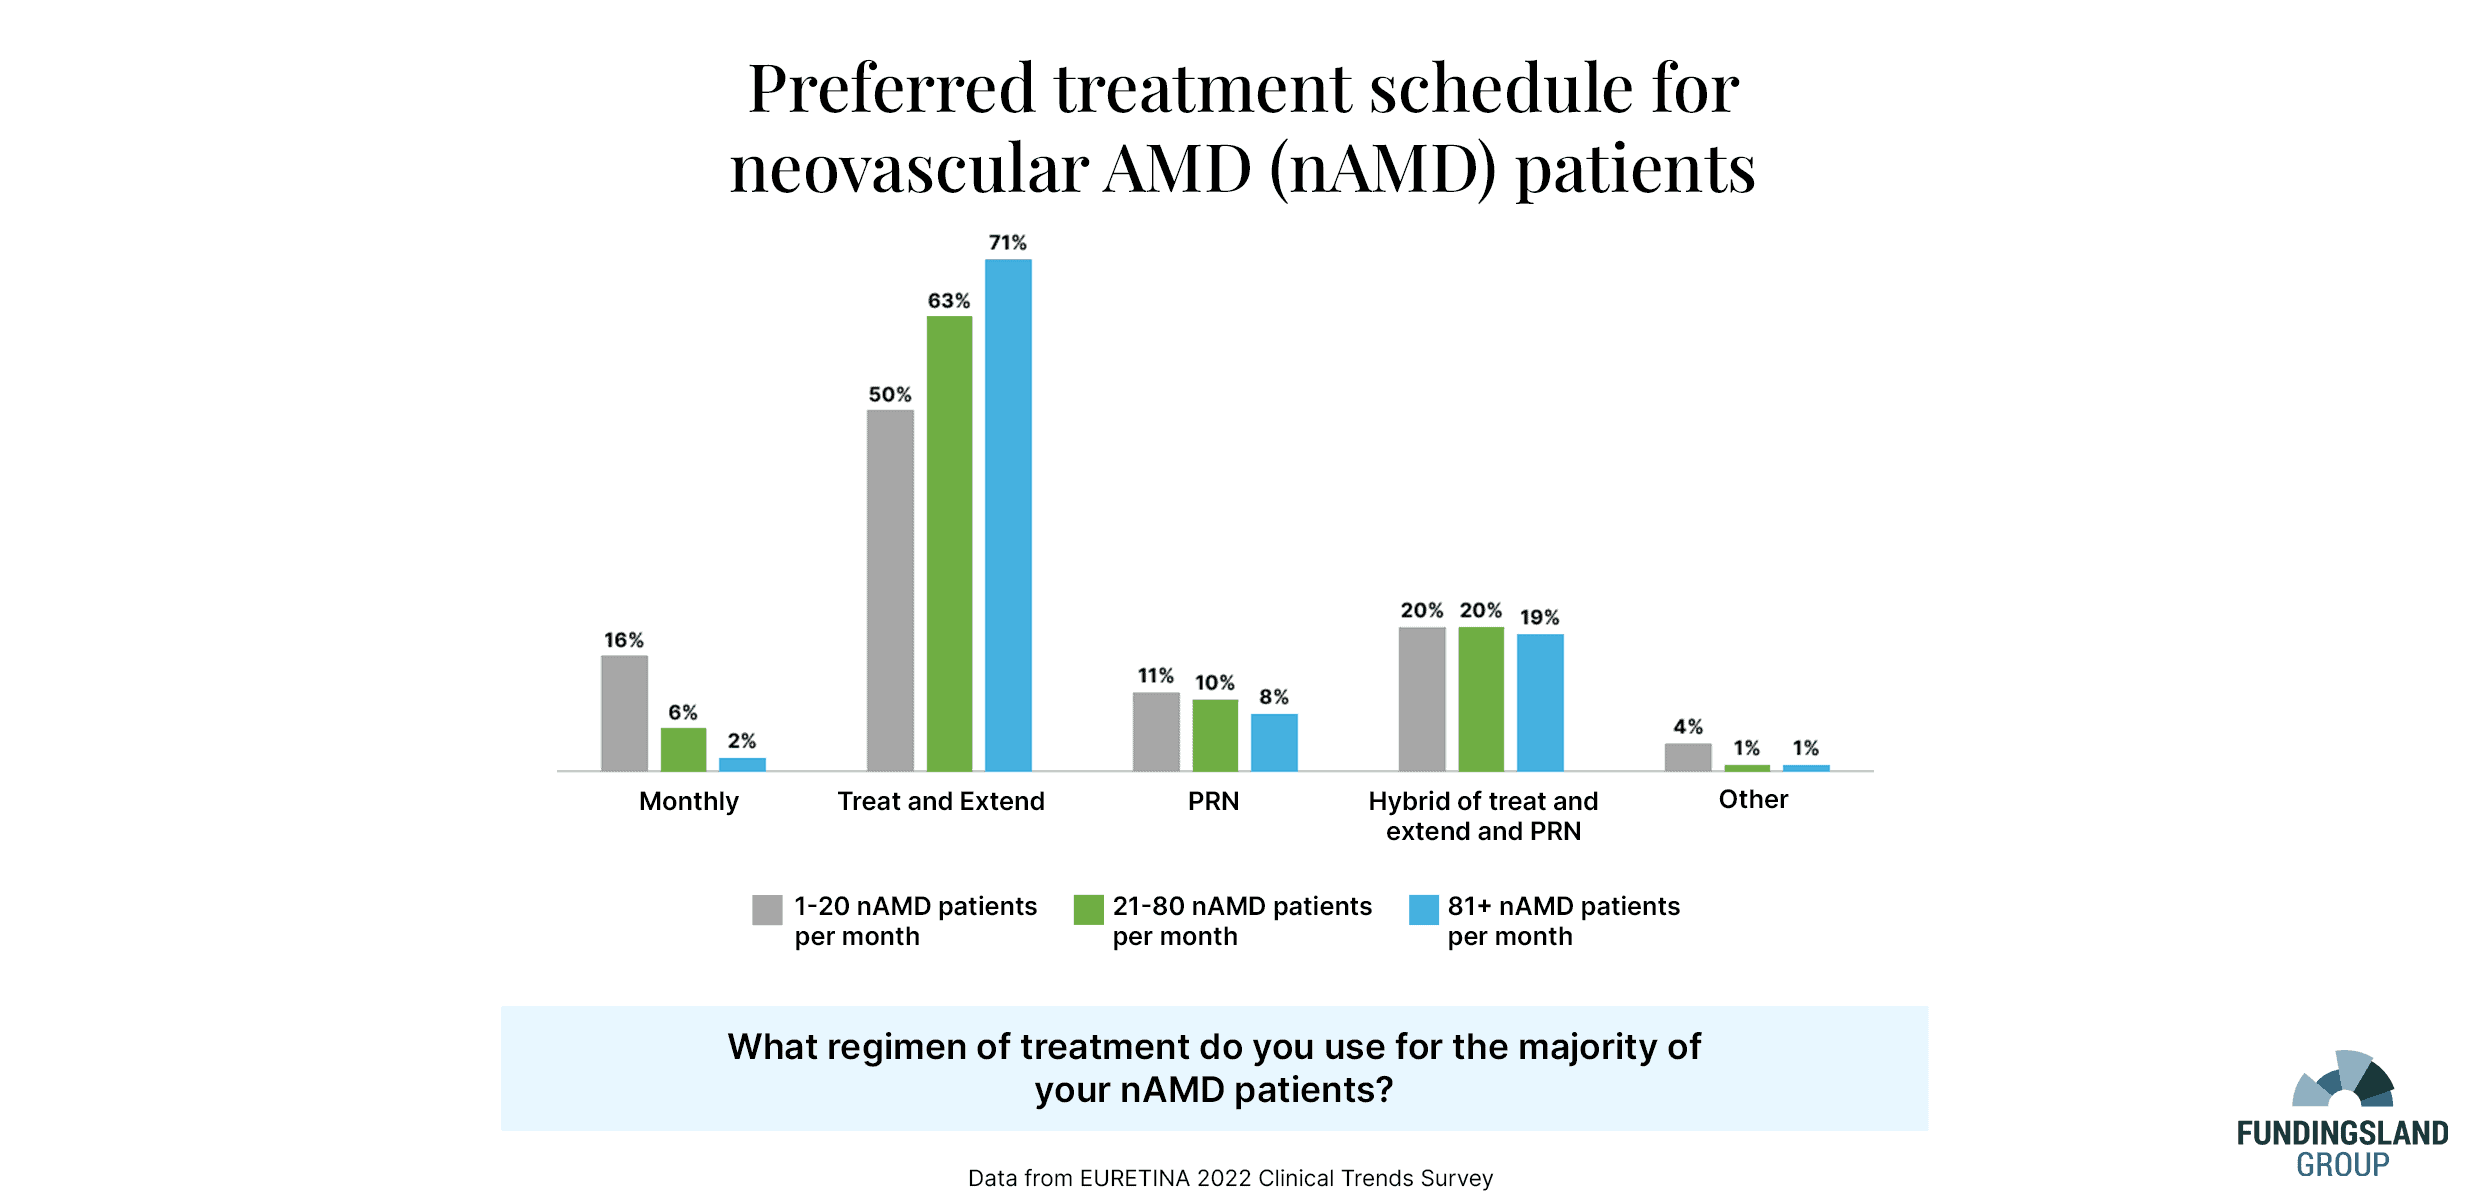 Data Snapshot: Preferred treatment schedule for nAMD patients